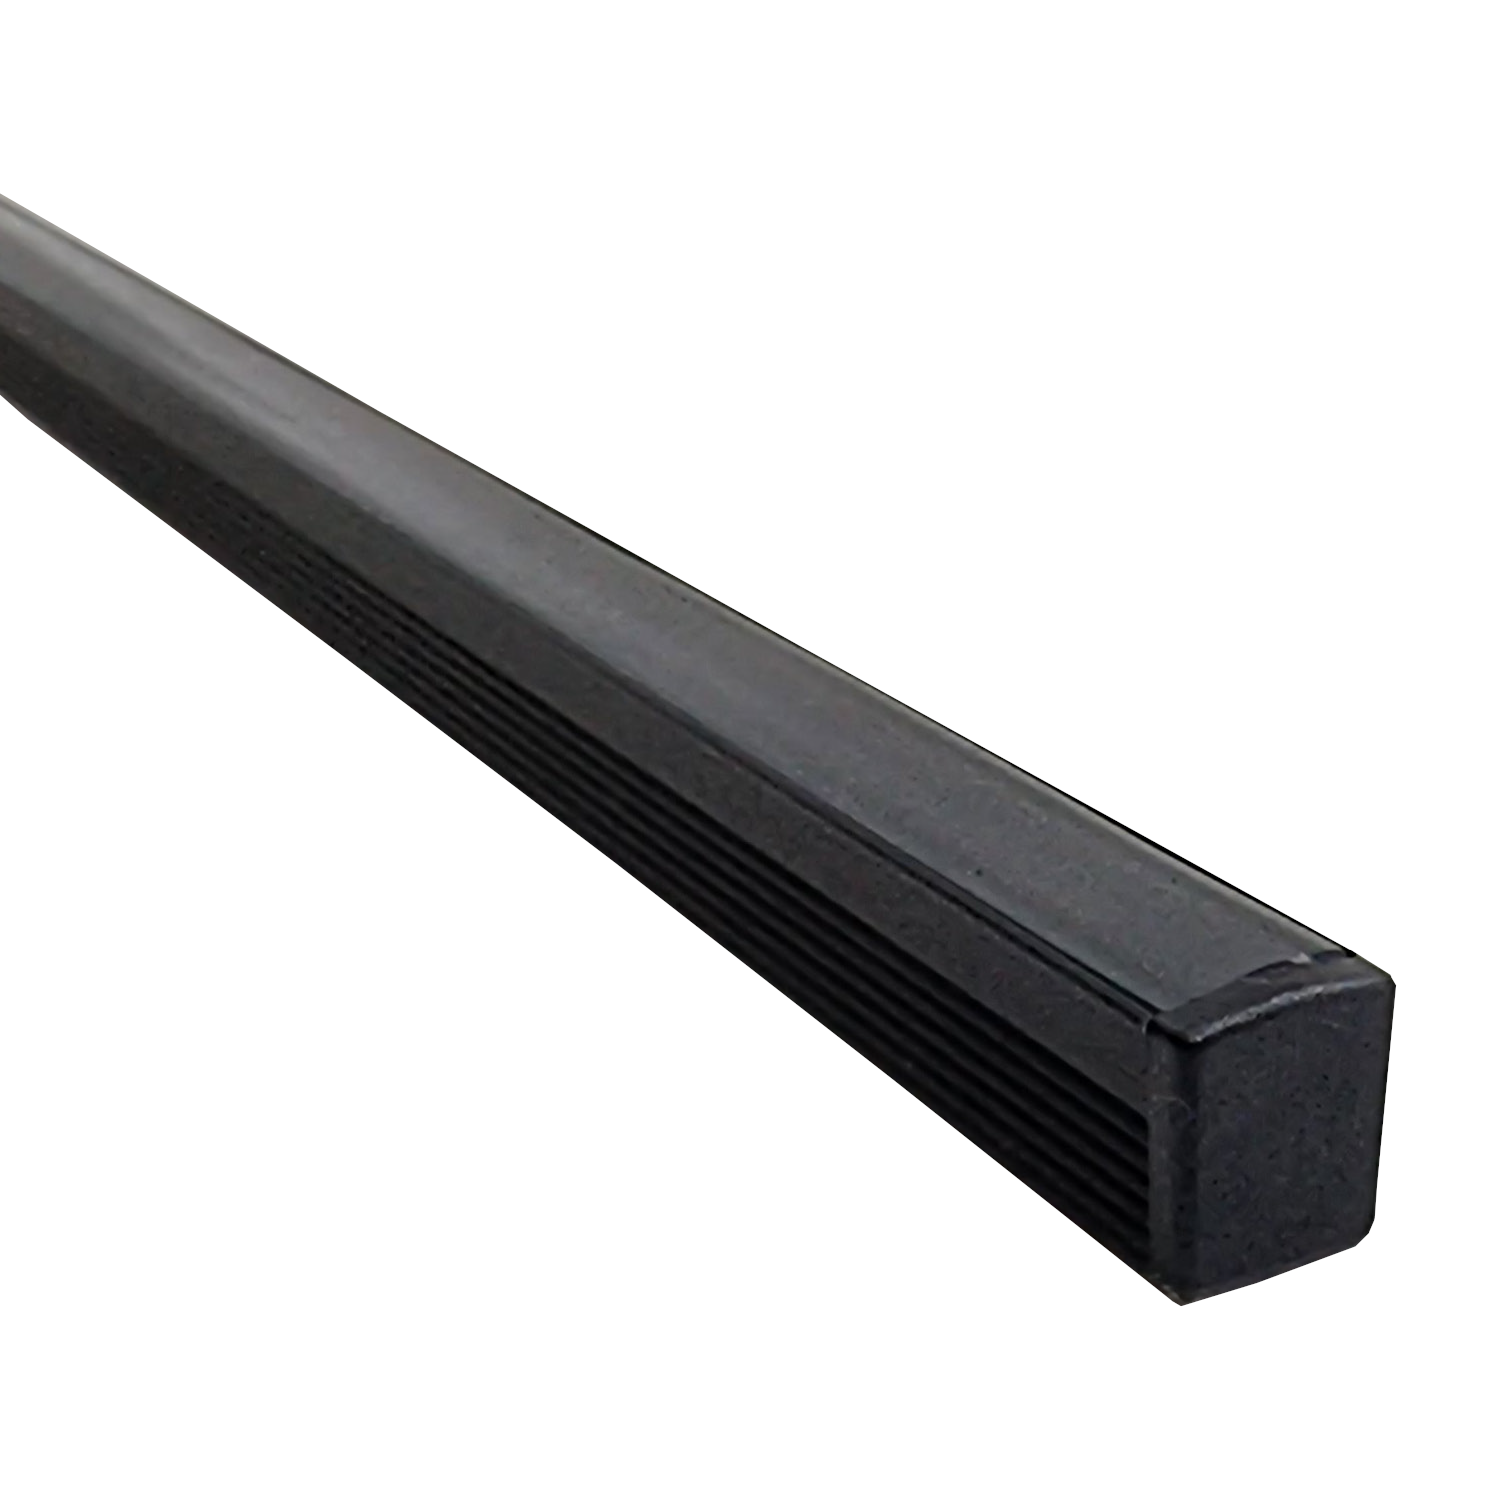 Product image of ONYX16 Slimline LED Extrusion with Black Diffuser